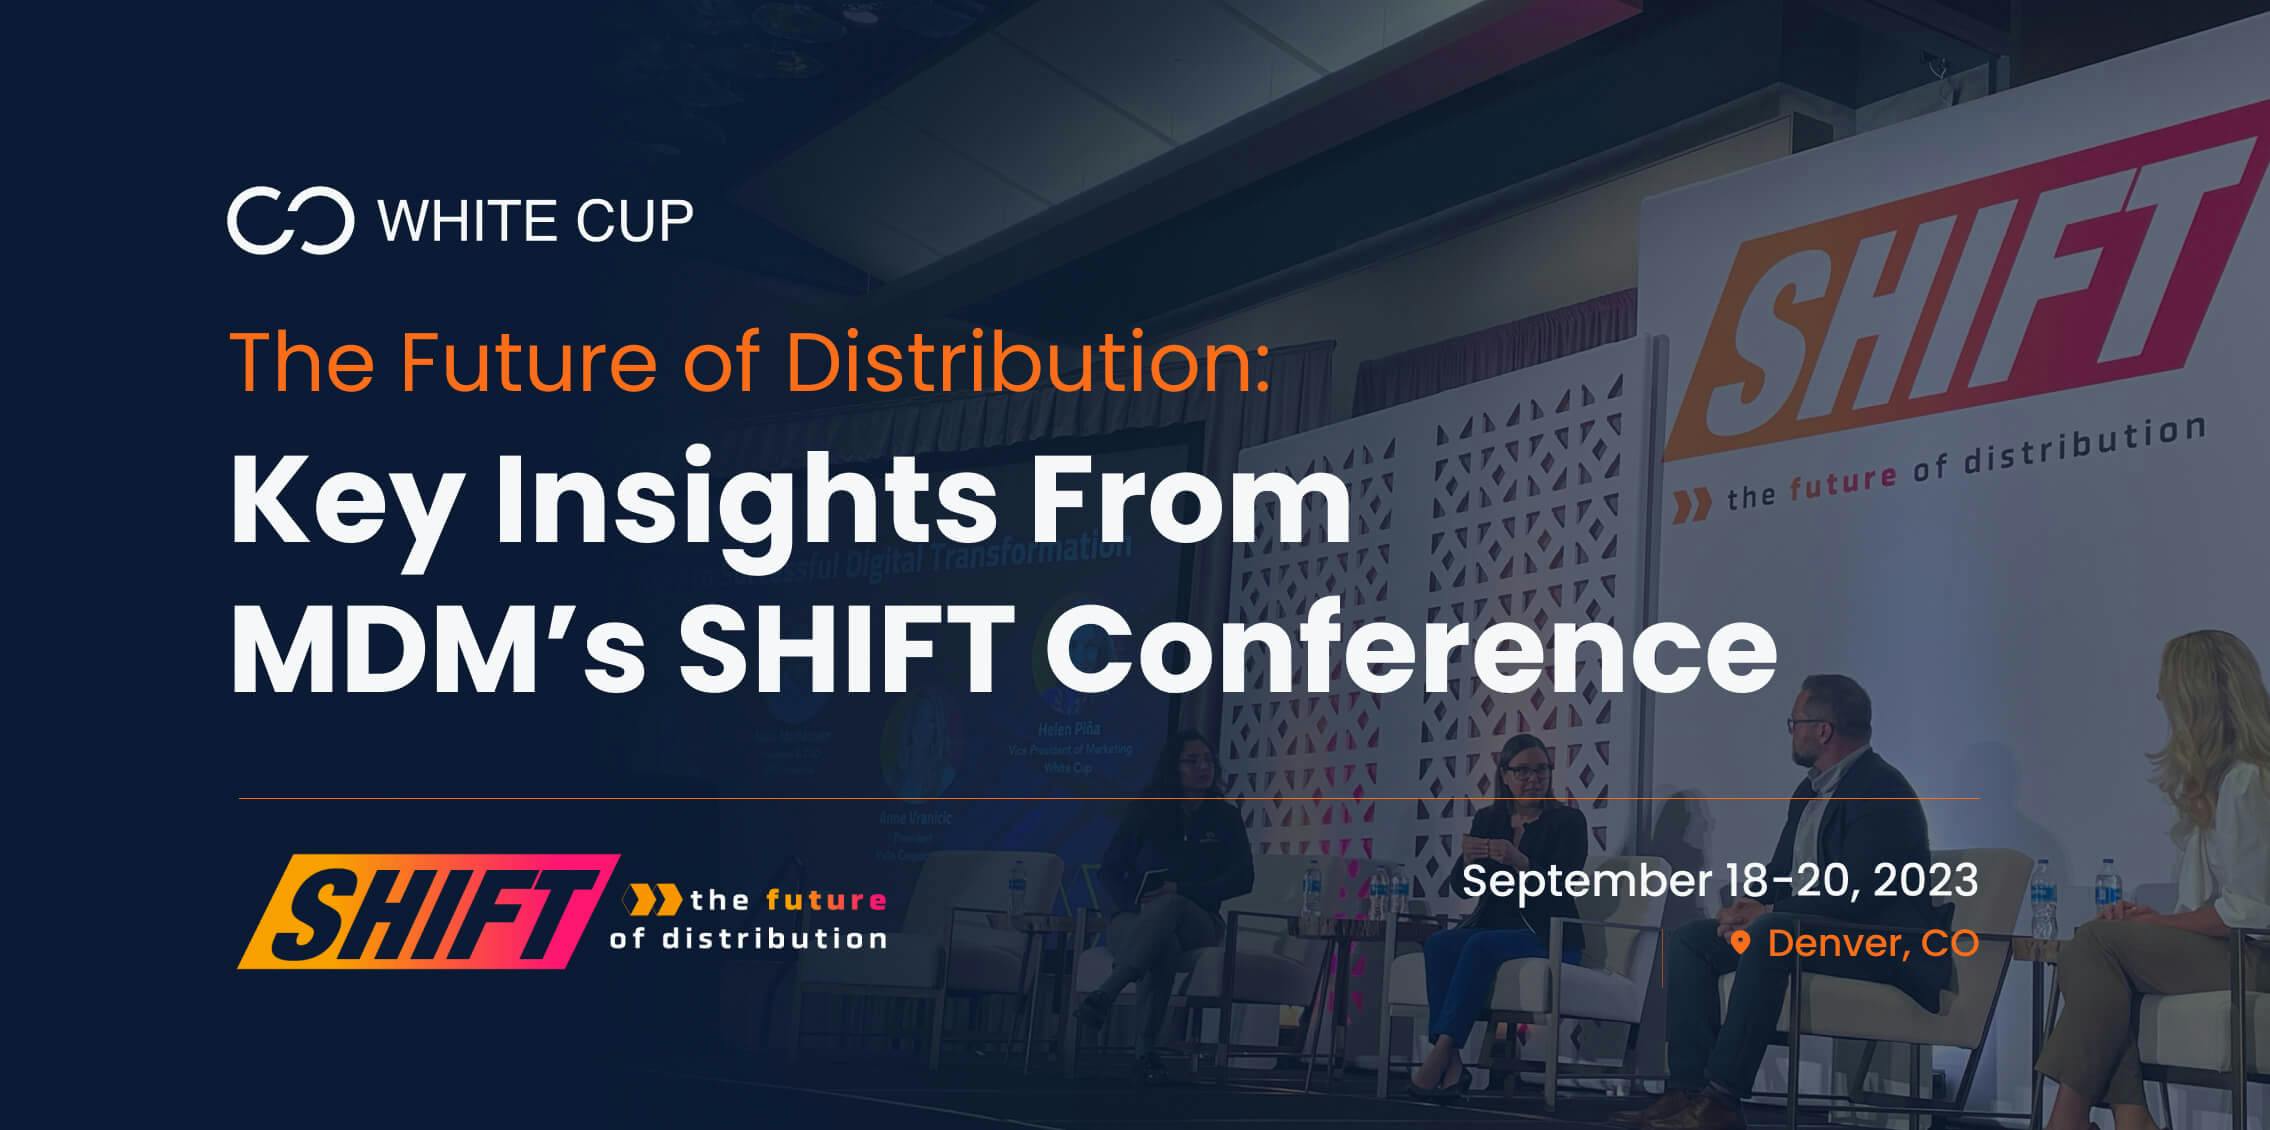 The Future of Distribution Key Insights From MDM’s SHIFT Conference